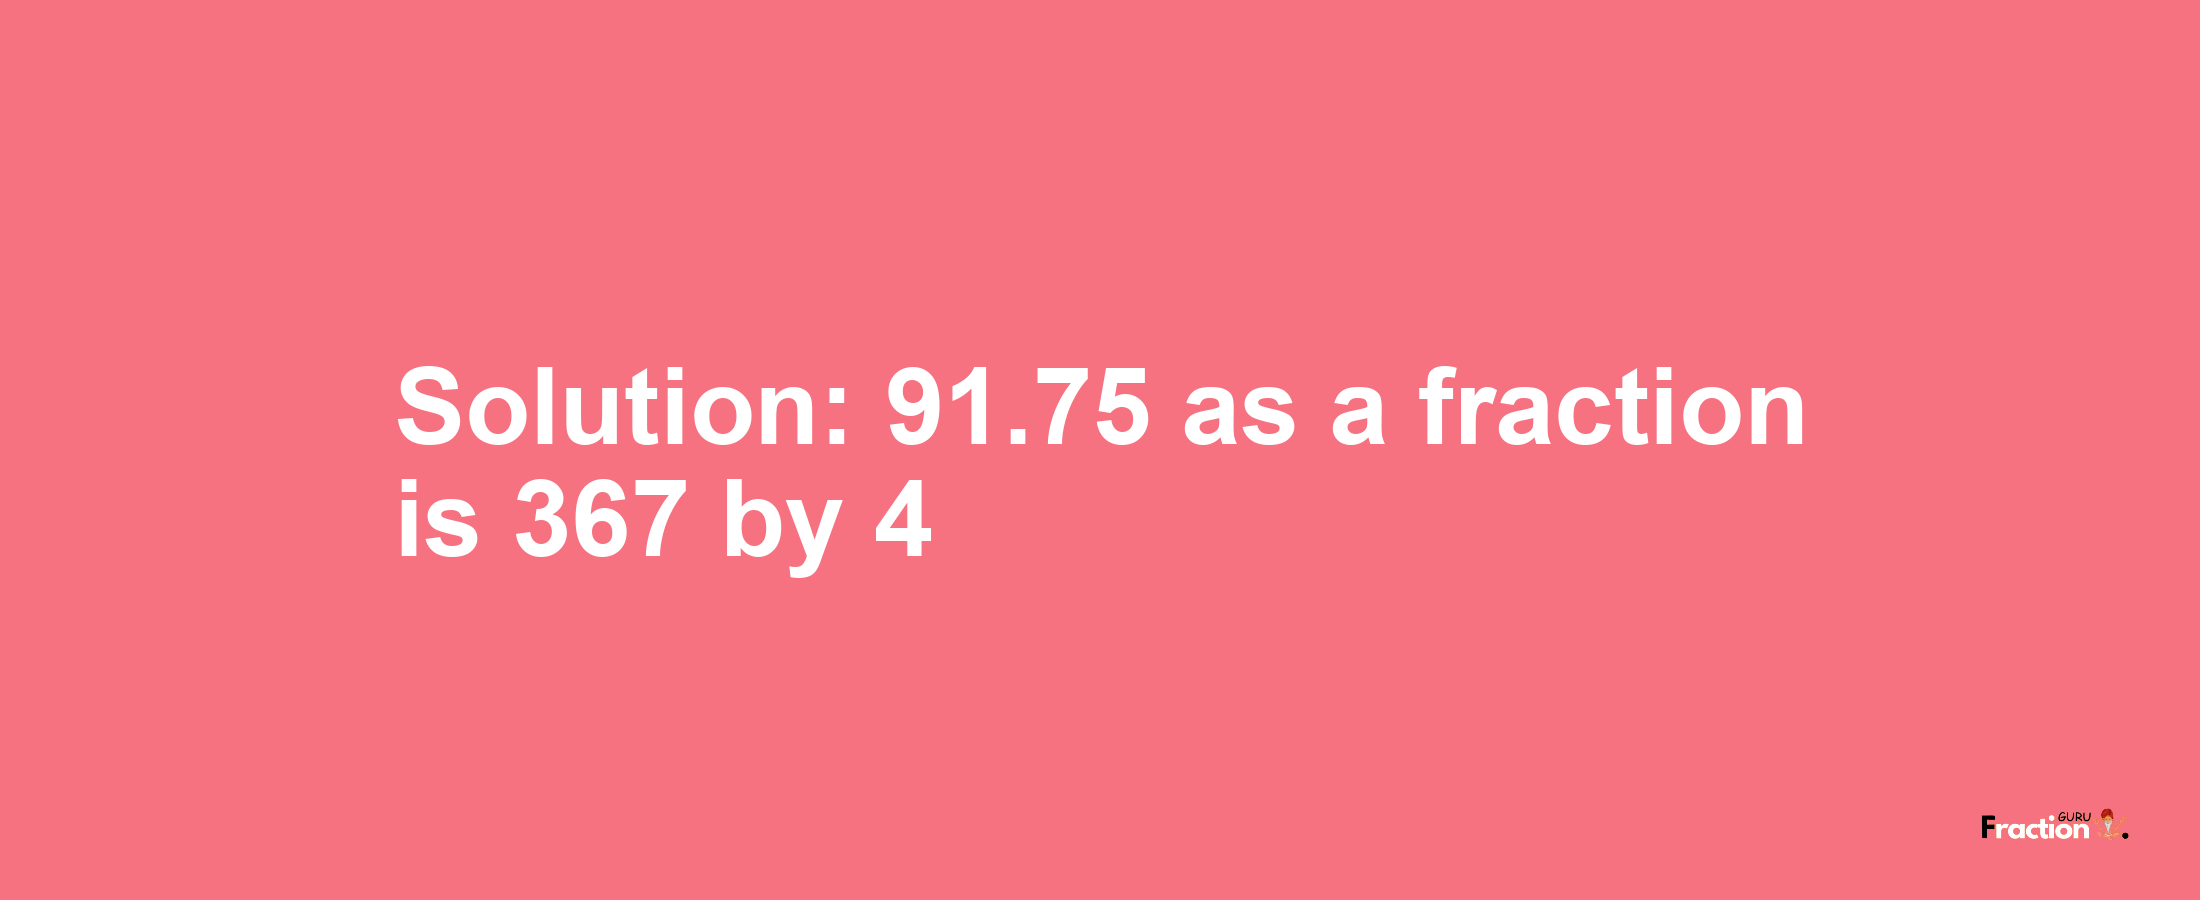 Solution:91.75 as a fraction is 367/4